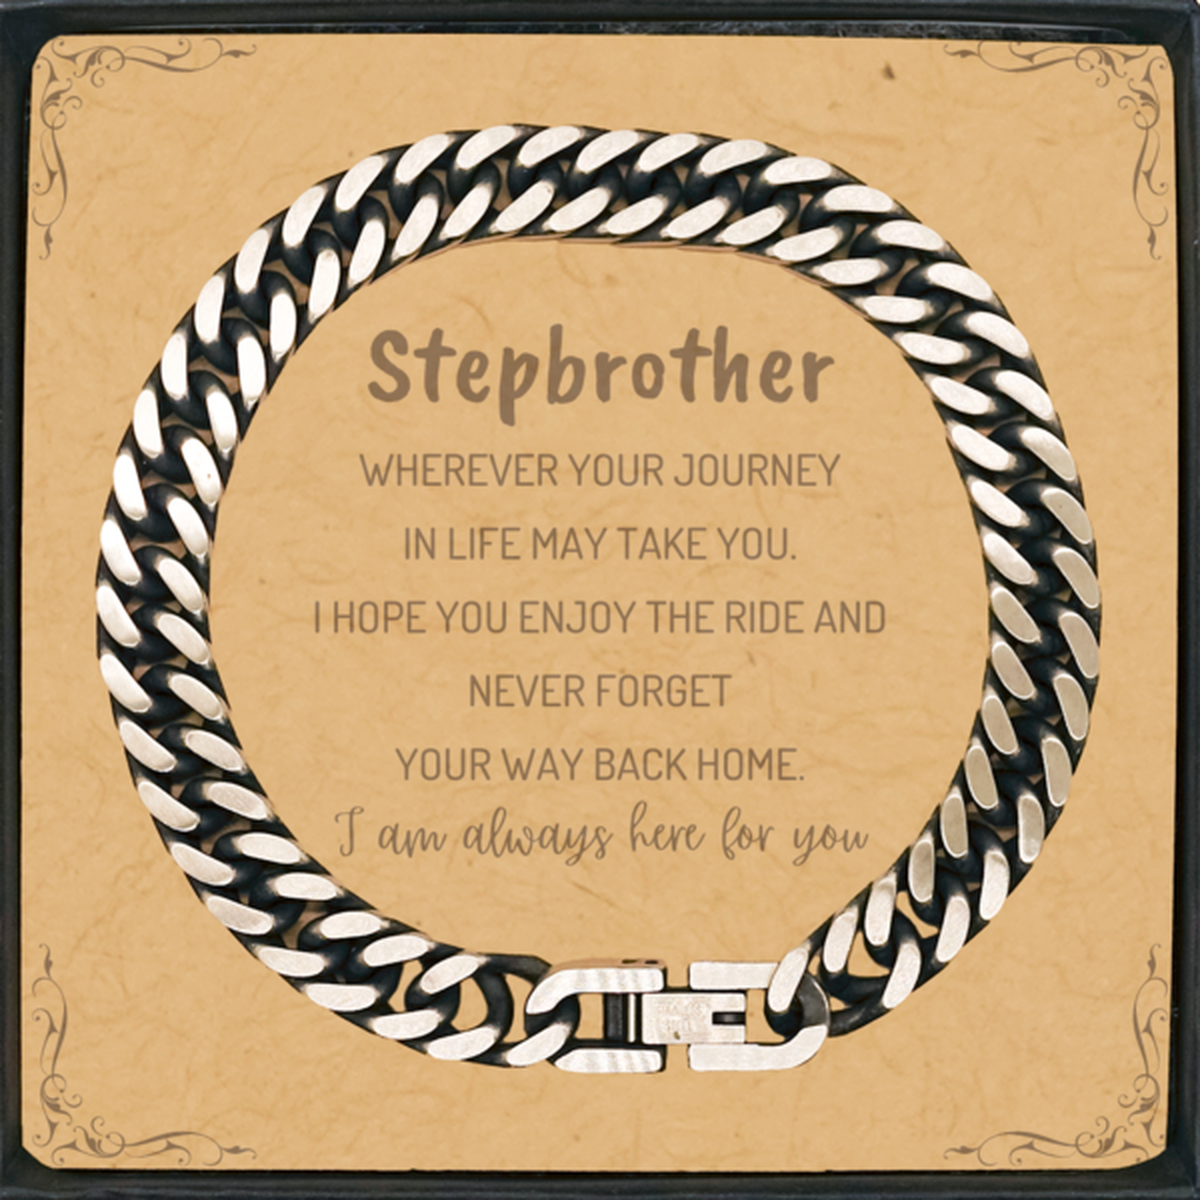 Stepbrother wherever your journey in life may take you, I am always here for you Stepbrother Cuban Link Chain Bracelet, Awesome Christmas Gifts For Stepbrother Message Card, Stepbrother Birthday Gifts for Men Women Family Loved One